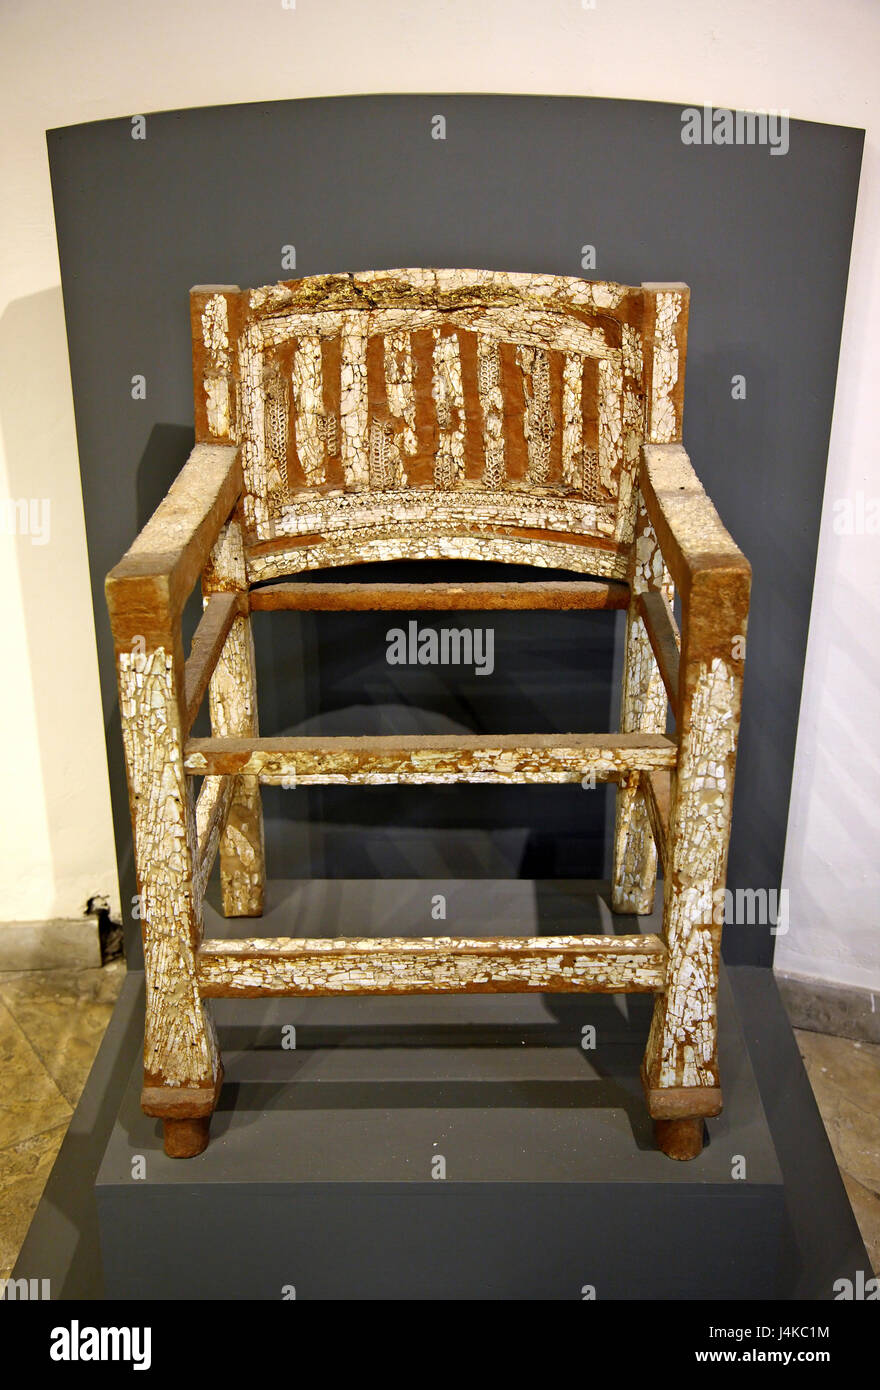 Throne (8th century B.C) made of wood covered with ivory plaques in the Cyprus (archaeological) Museum, Nicosia, Lefkosia. Stock Photo